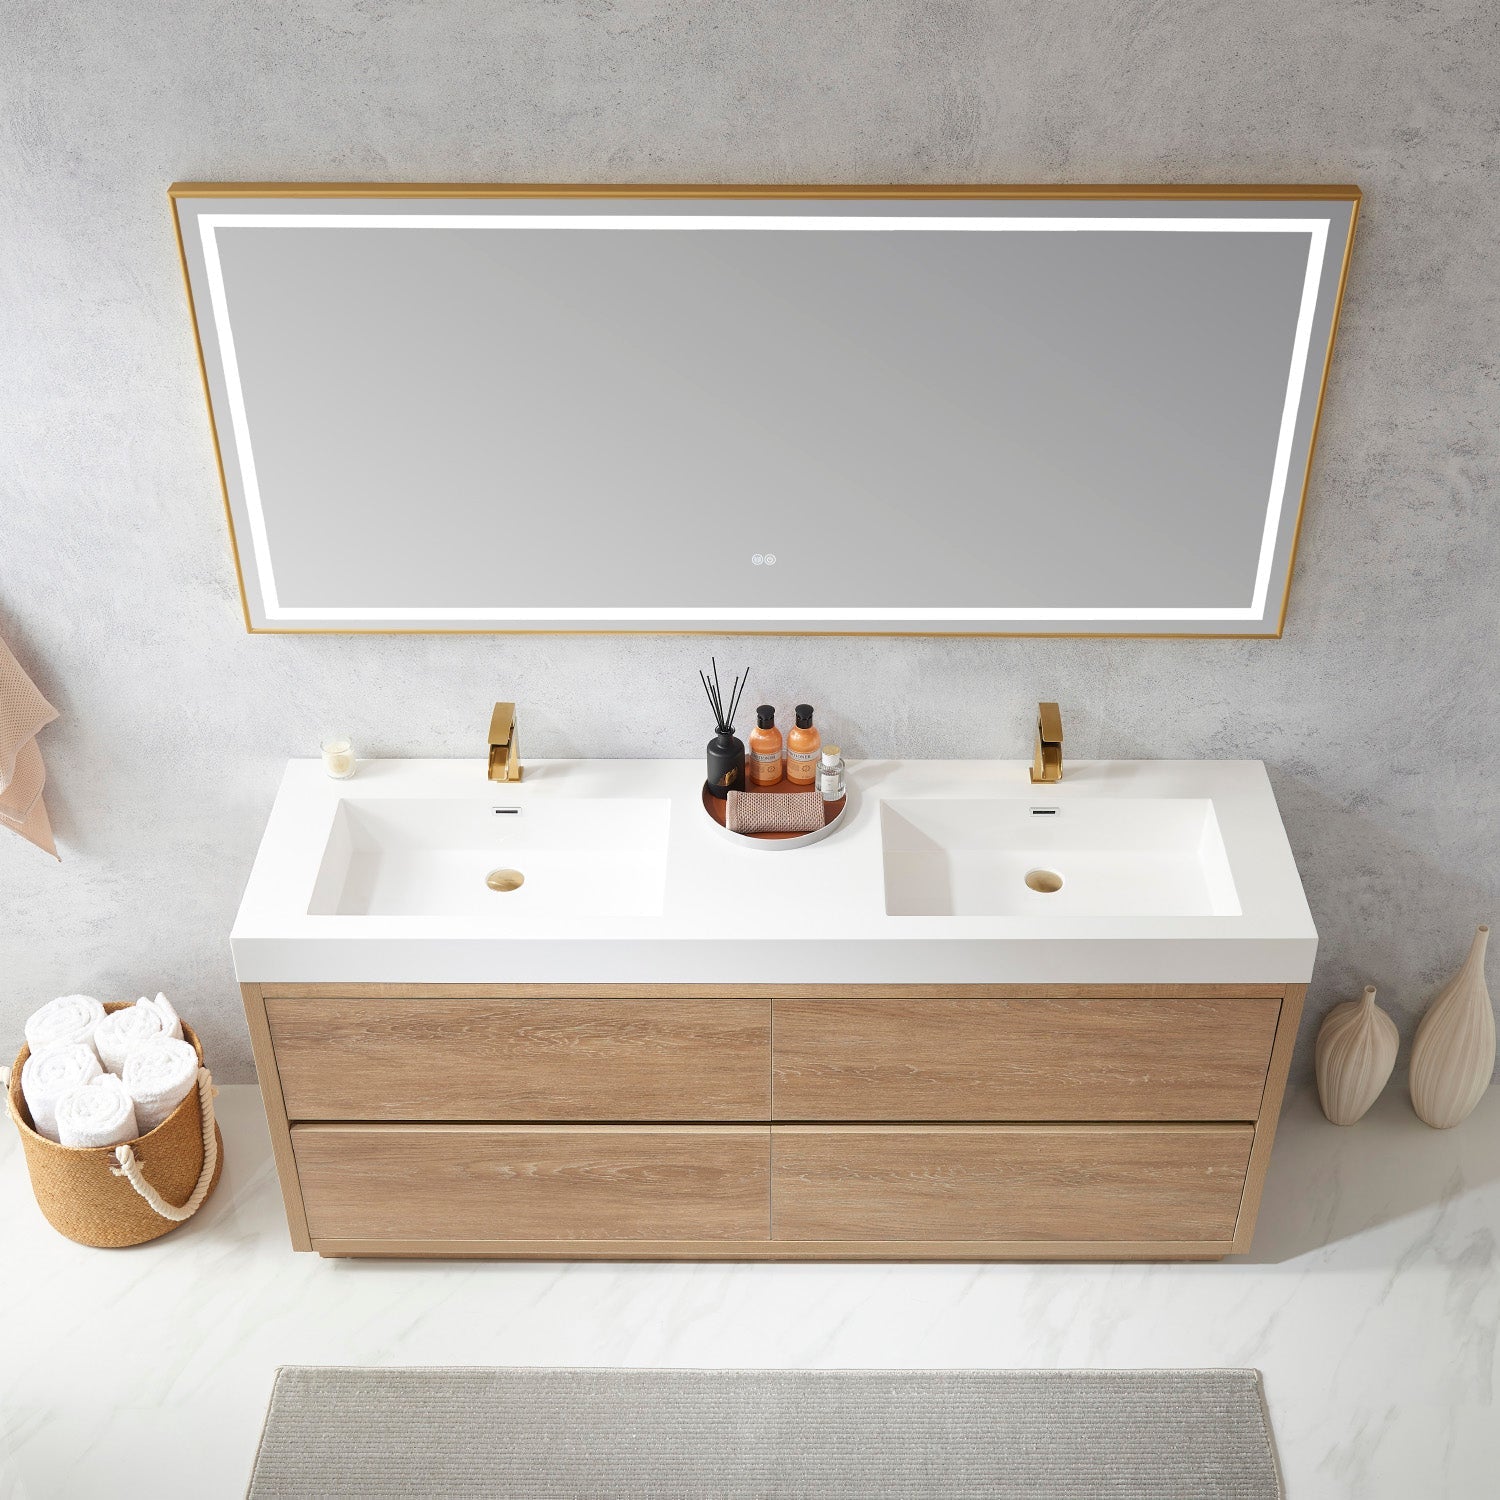 Vinnova Design Huesca 72" Double Sink Bath Vanity in North American Oak with White Composite Integral Square Sink Top - New Star Living